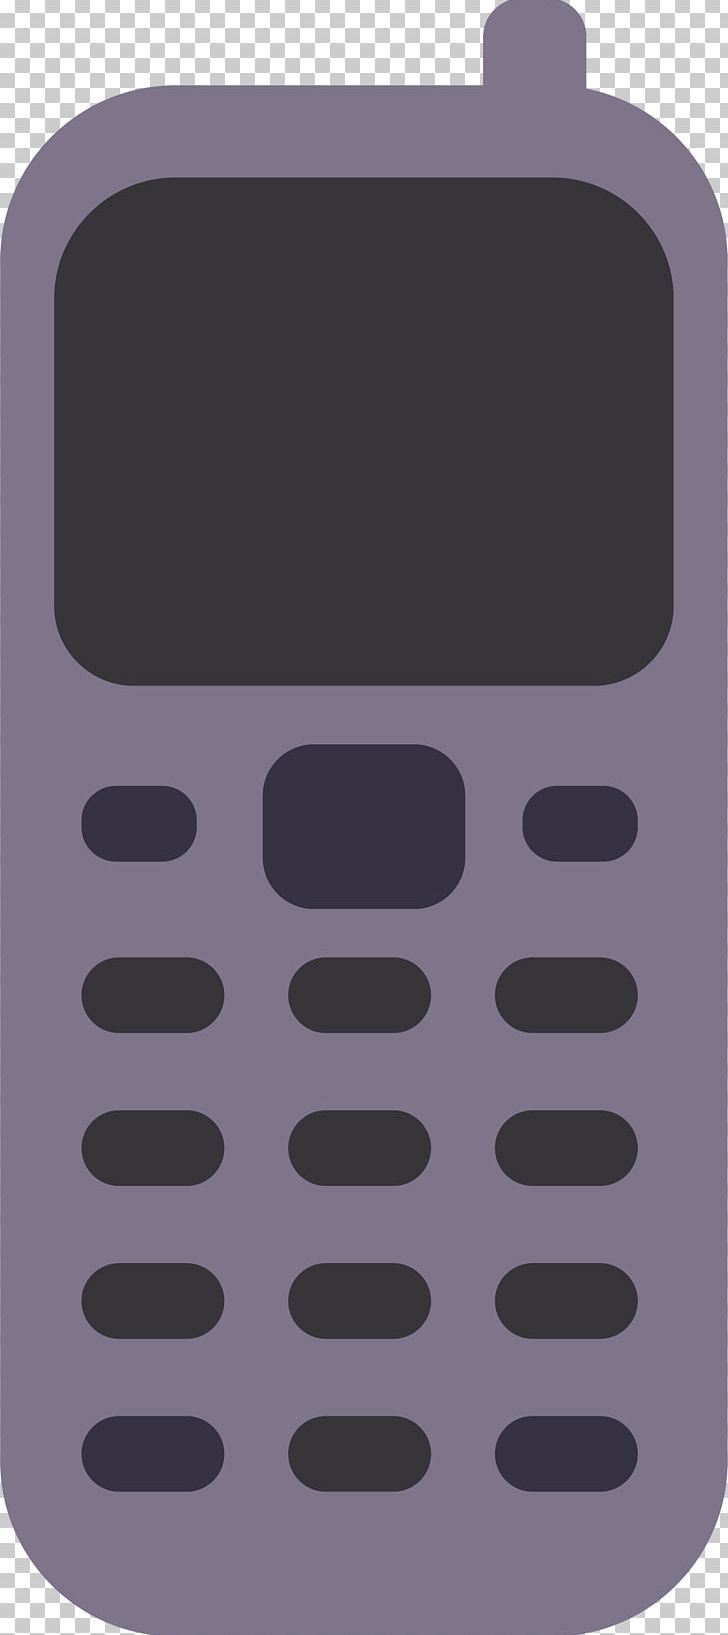 Feature Phone Mobile Phone Telephone Smartphone PNG, Clipart, Gadget, Hand, Hand Drawn, Mobile, Mobile Phone Free PNG Download